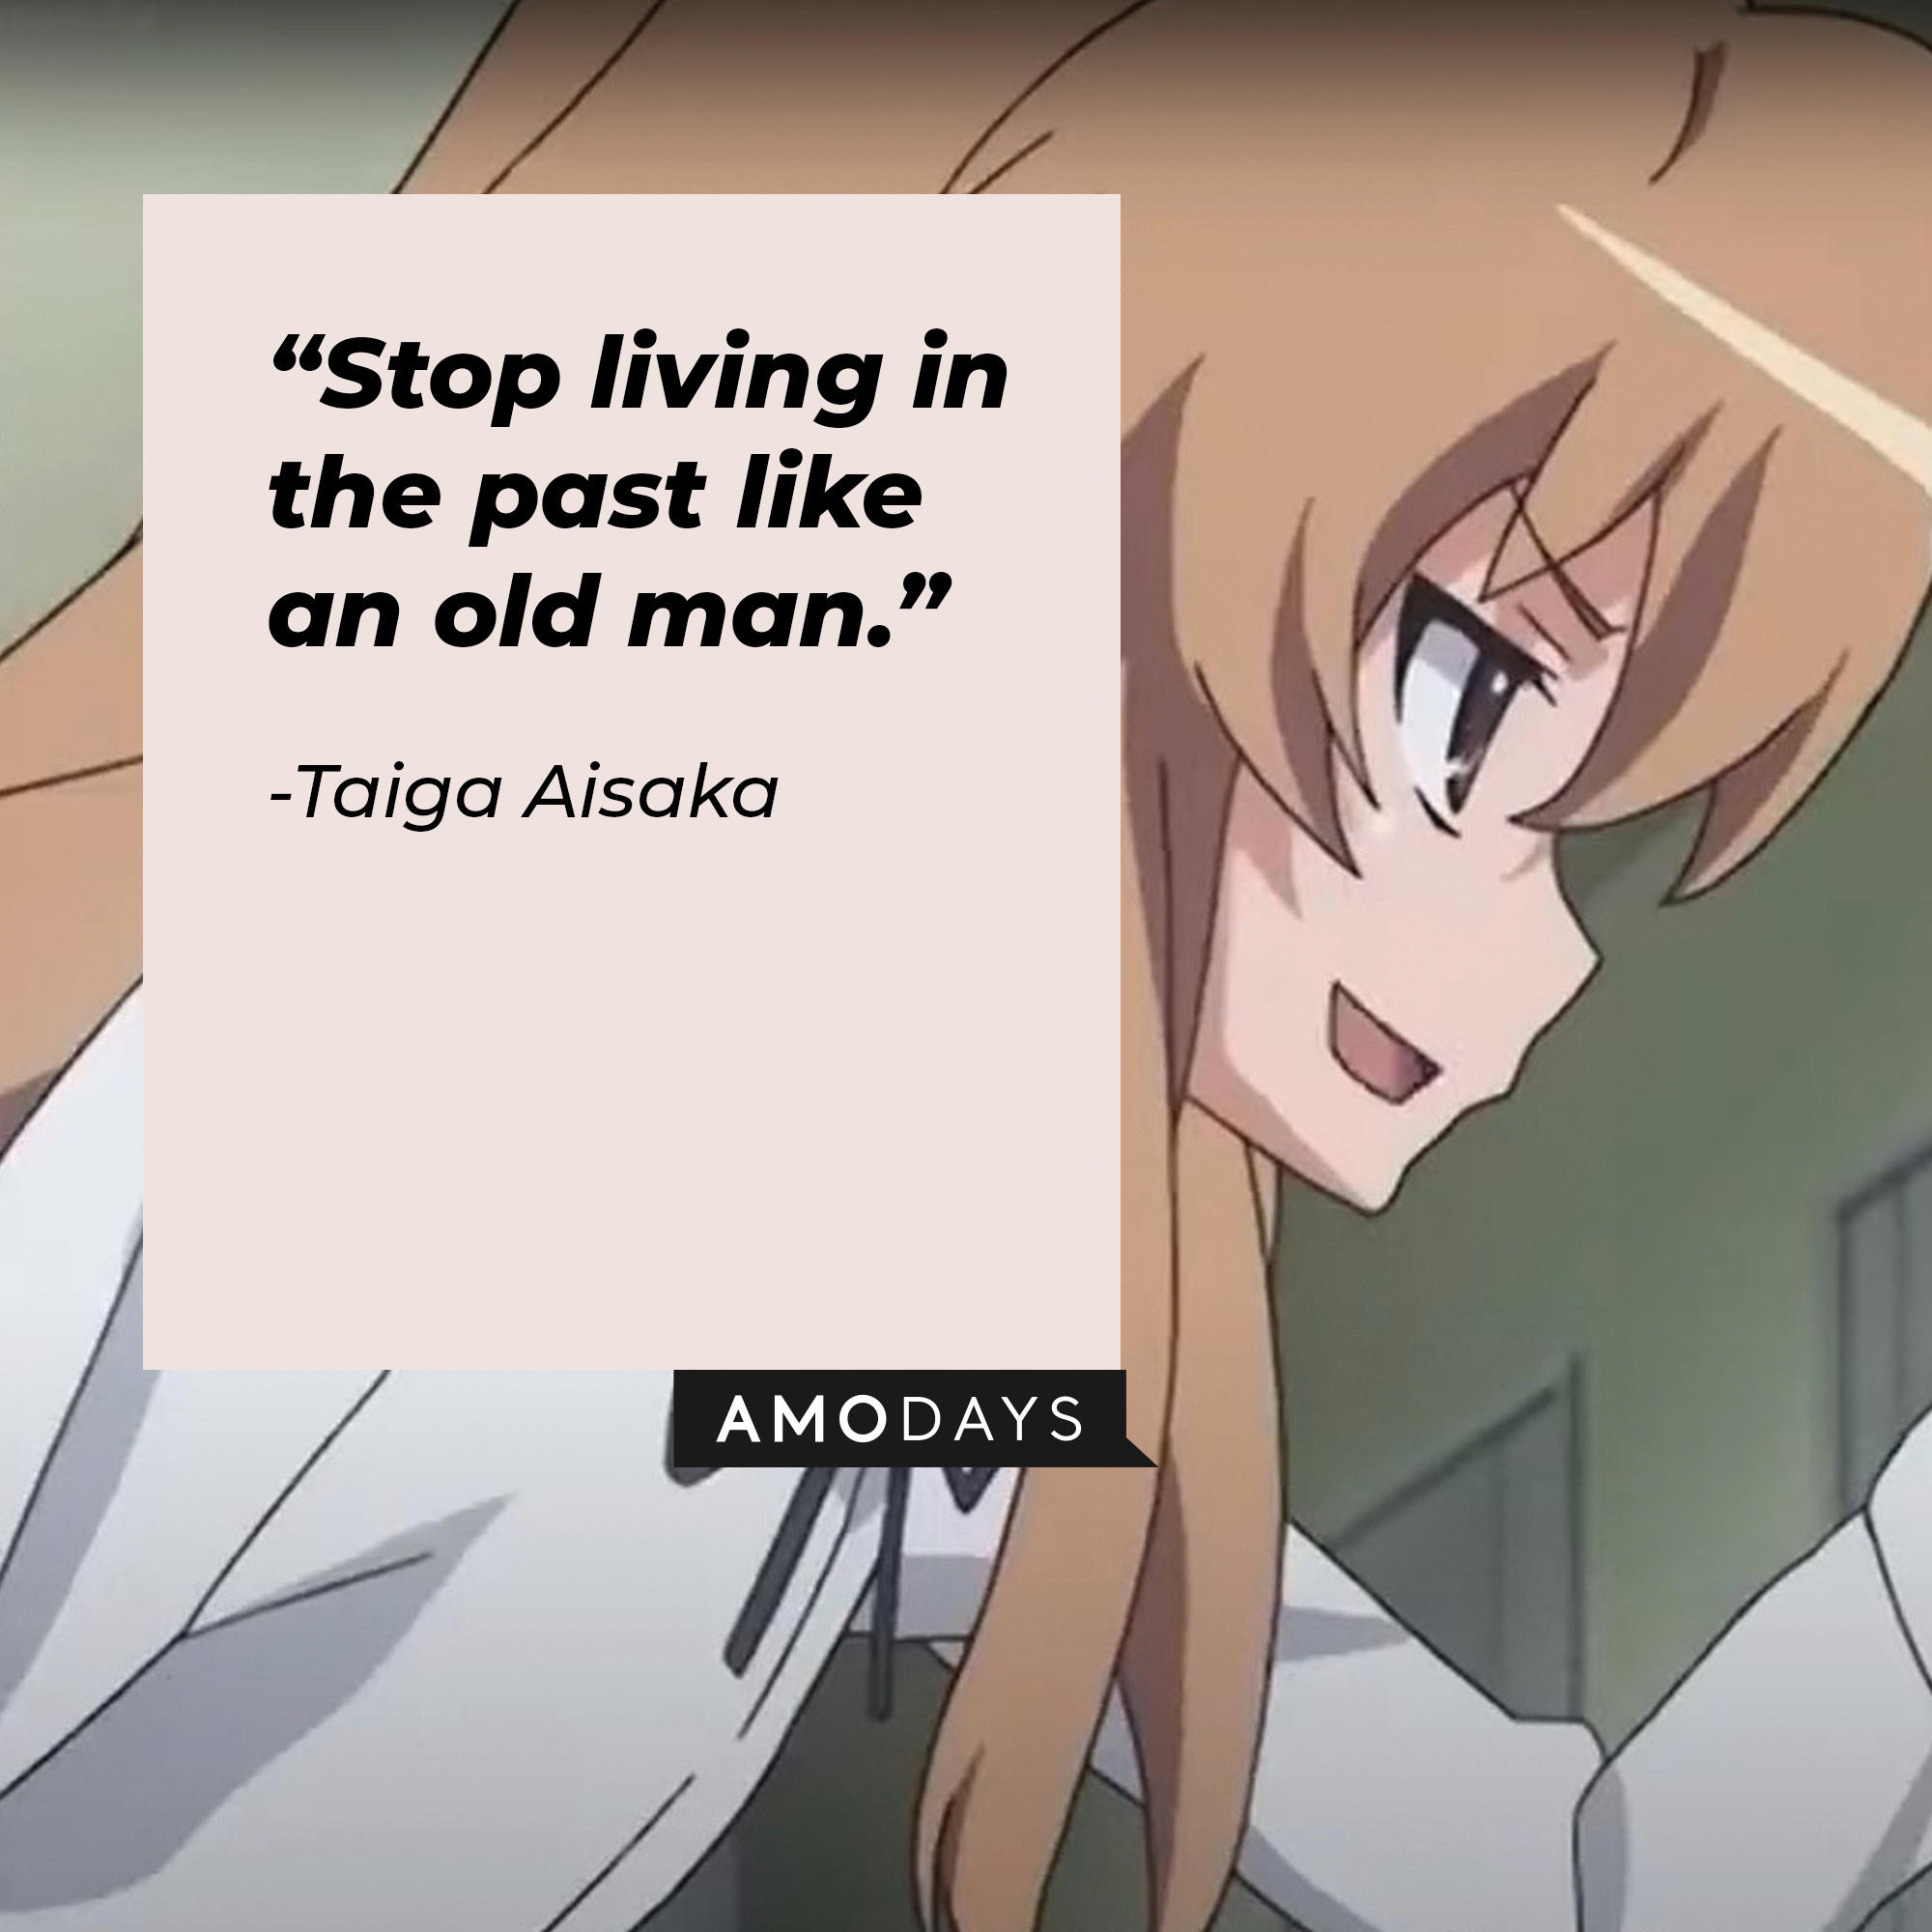 A picture of the animated character Taiga Aisaka with a quote by her: "Stop living in the past like an old man.” | Image: facebook.com/toradoraoff